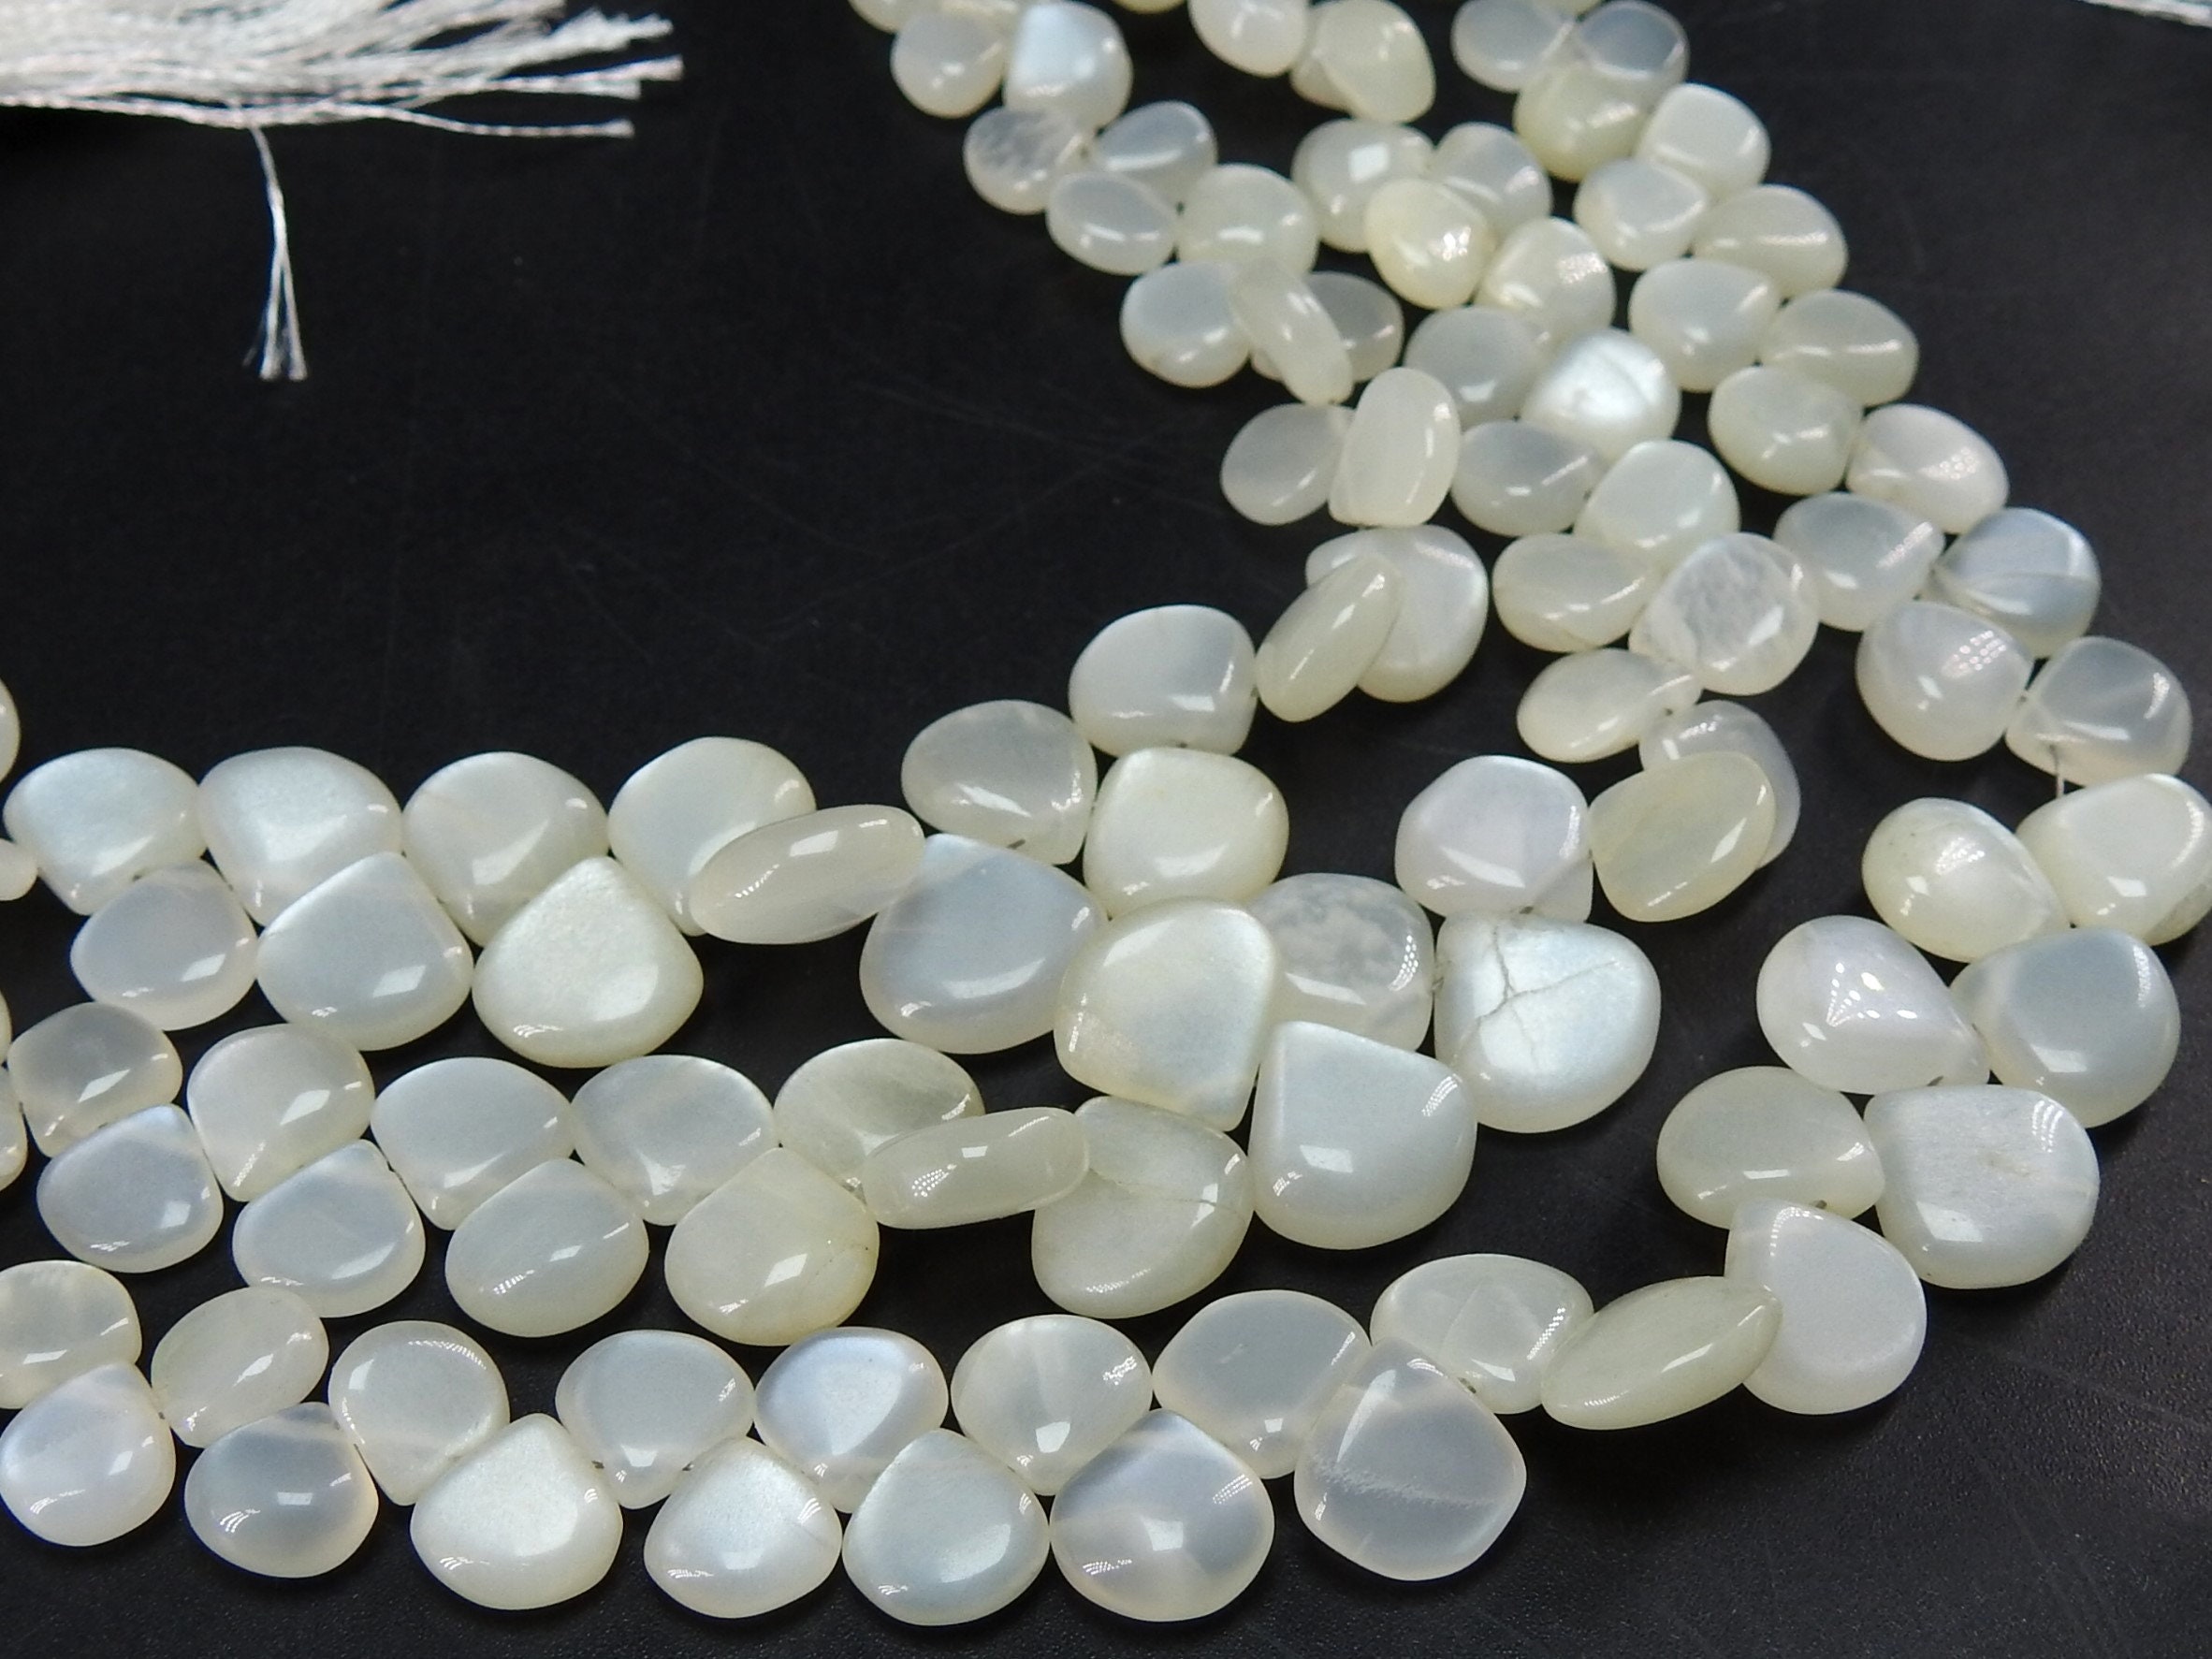 White Moonstone Smooth Heart,Teardrop,Drop,Loose Stone,Handmade Bead,For Making Jewelry,Wholesaler,Supplies 8Inch 6X12MM Approx (pme)BR2 | Save 33% - Rajasthan Living 19